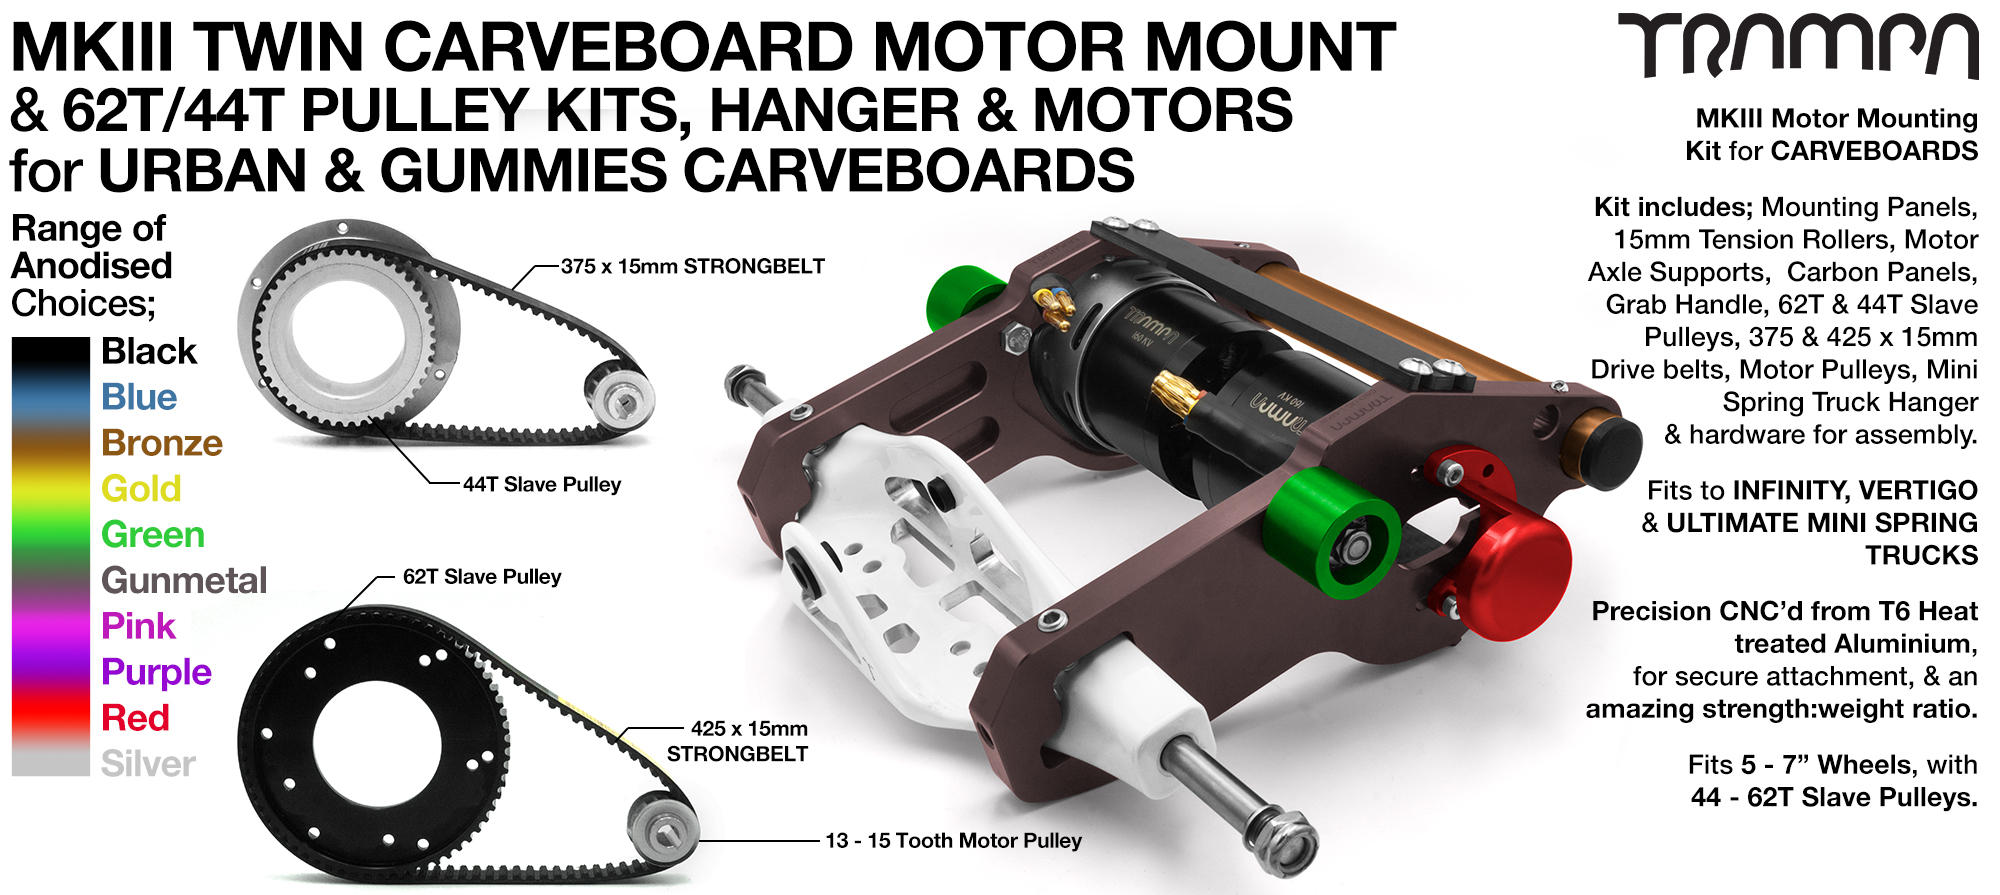 MkIII 2in1 CARVEBOARD Motormount on a HANGER with 44 tooth GUMMIES  & 62 tooth URBAN Pulleys & TRAMPA Motor - TWIN